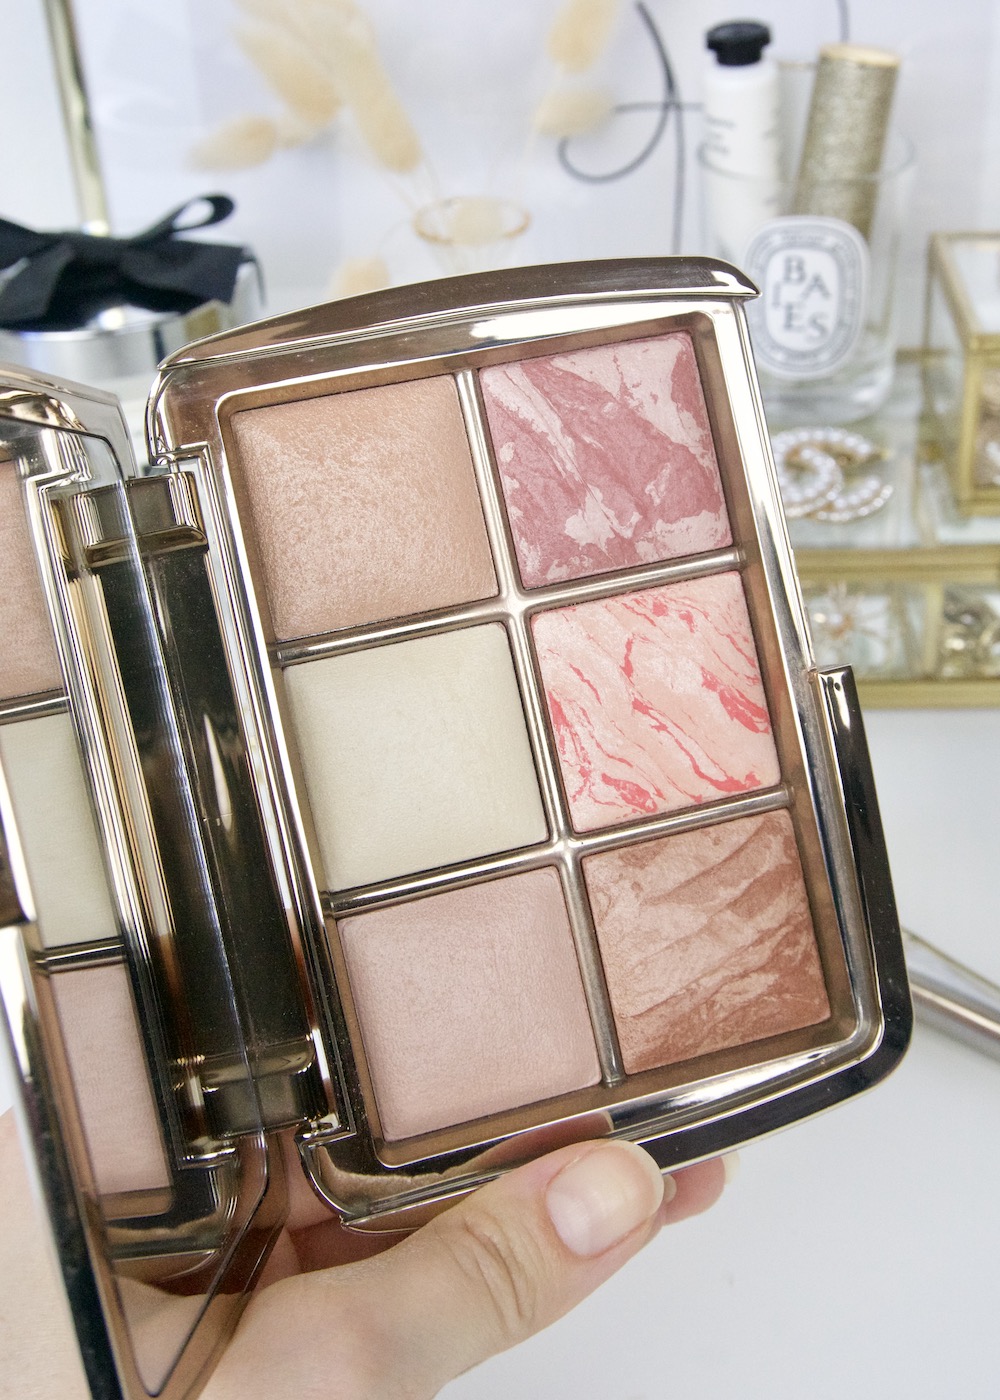 Hourglass Cosmetics Ambient Lighting Holiday Palette Edit Sculpture